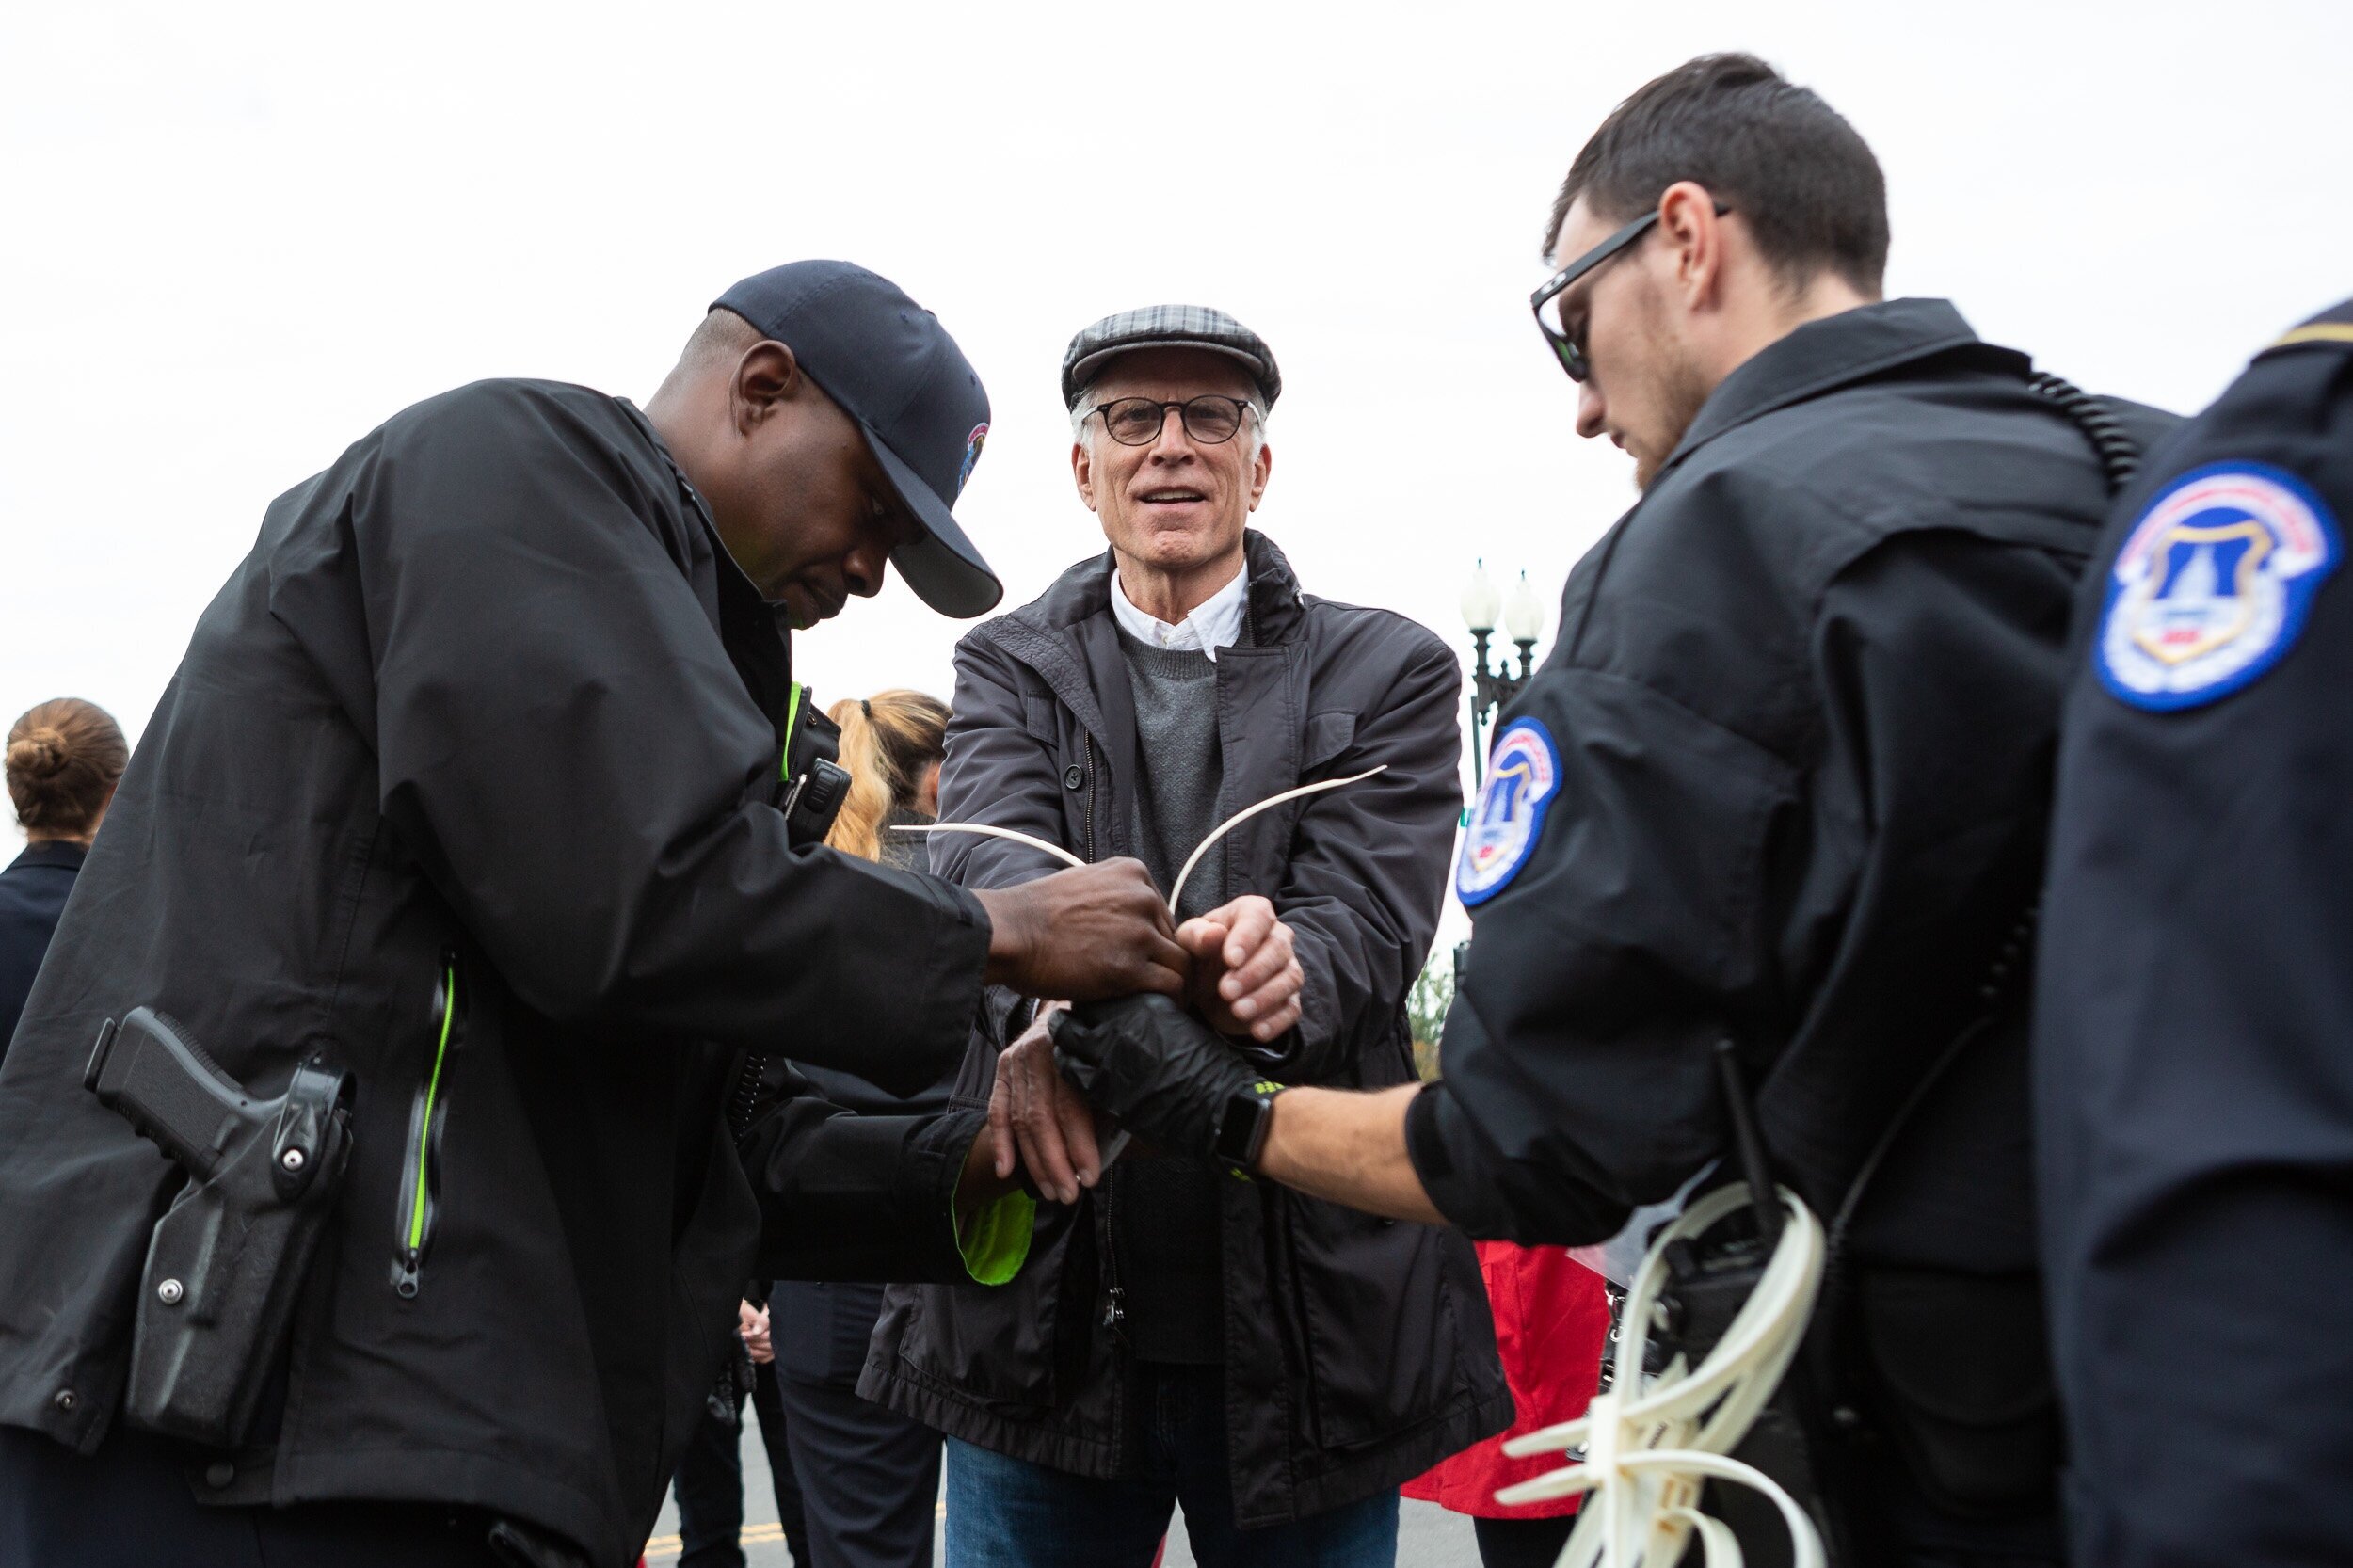  Actor Ted Danson gets arrested during a climate protest on Capitol Hill Oct. 25, 2019. 